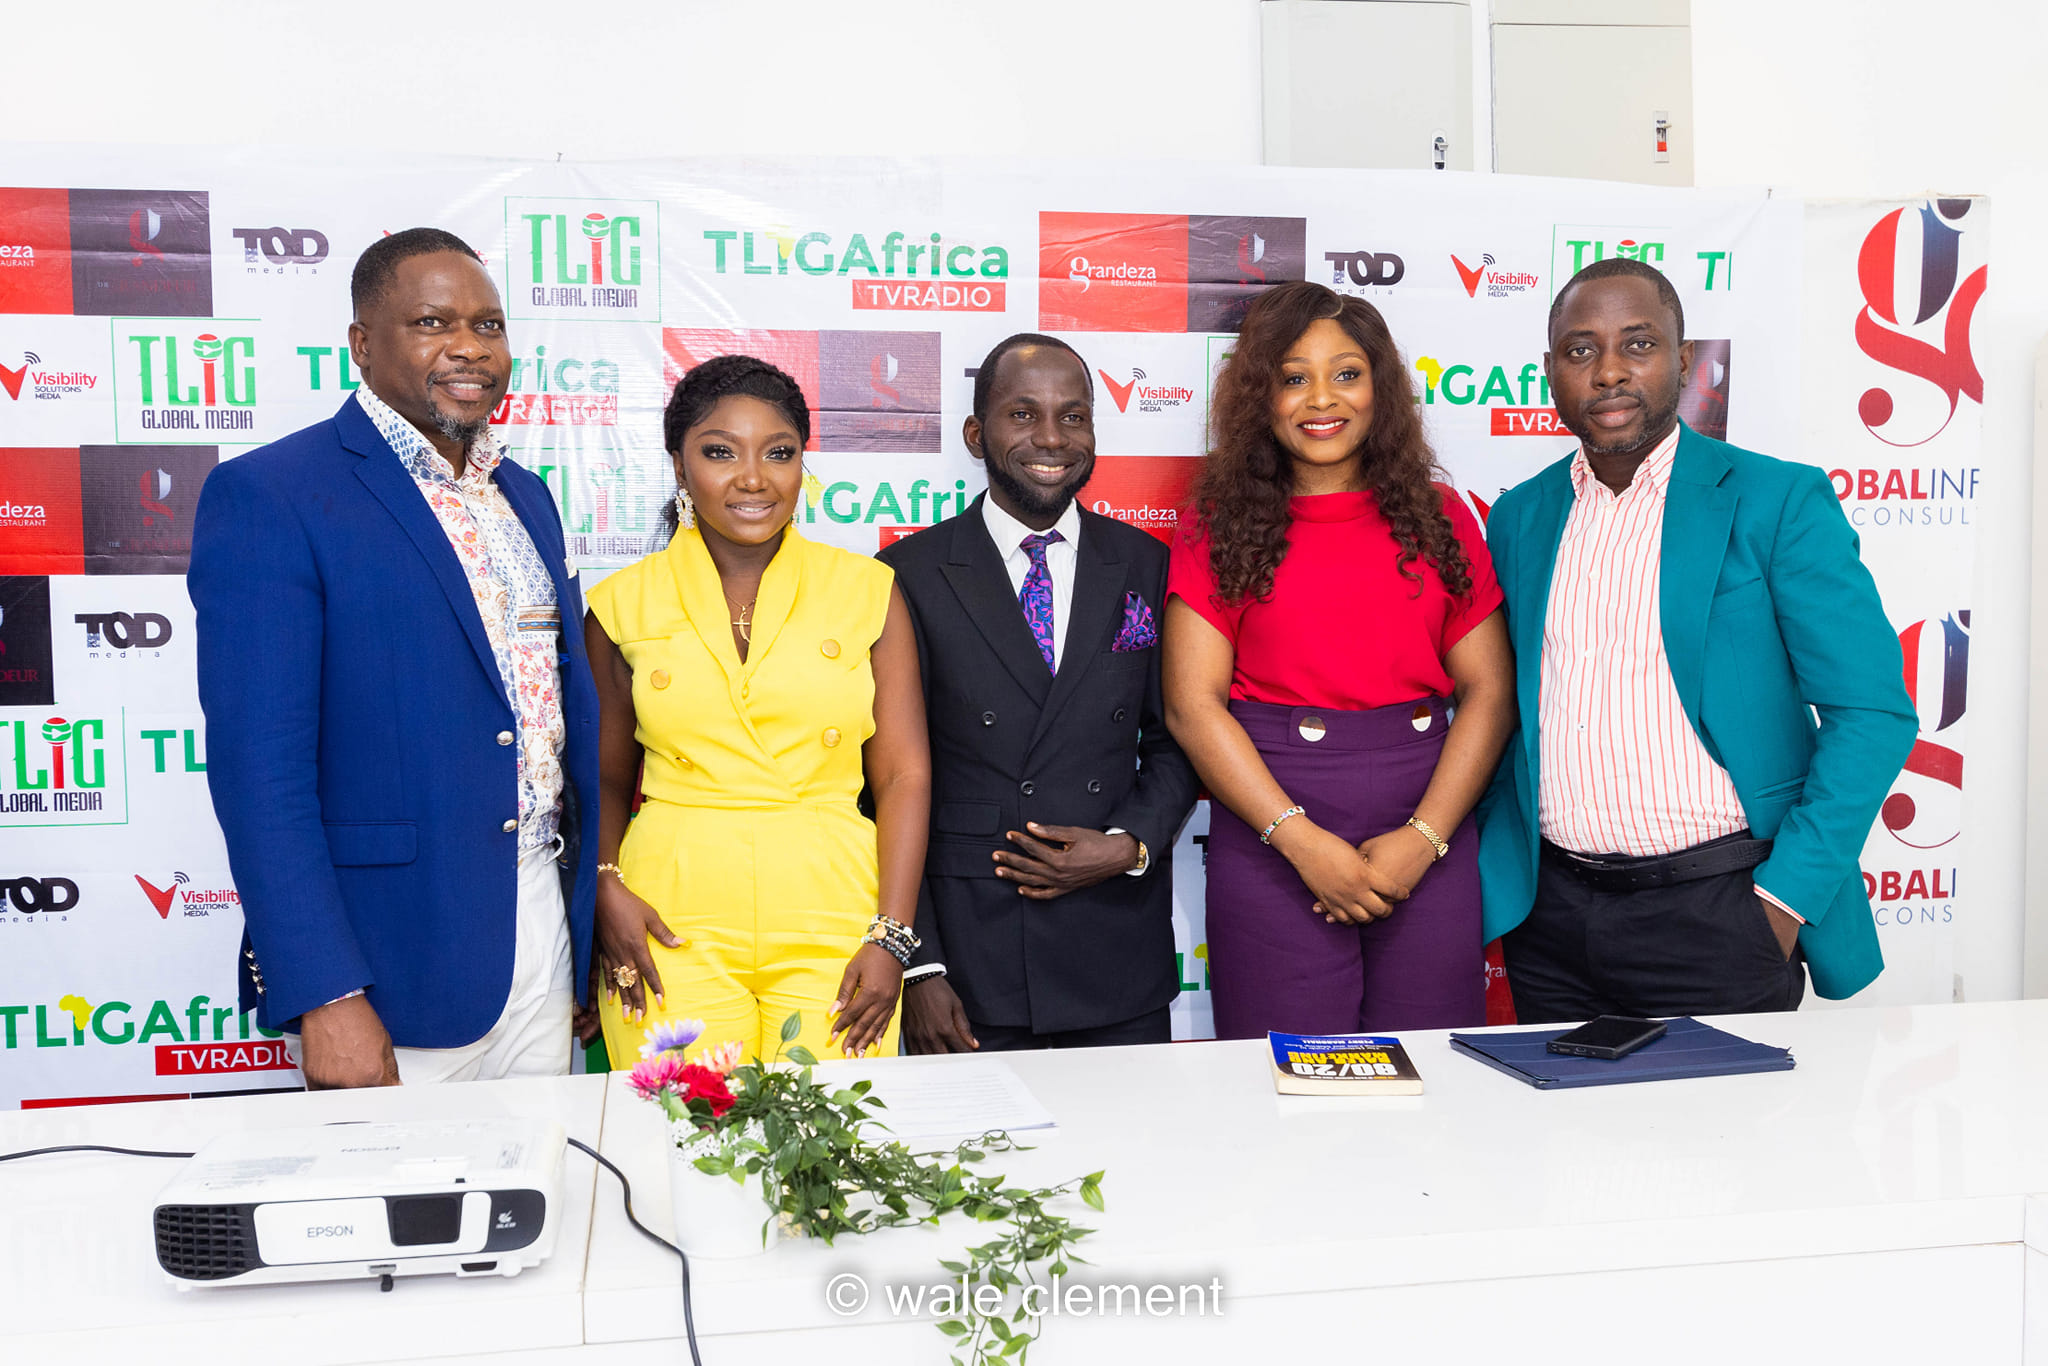 You are currently viewing WHAT YOU MISSED AT THE TLIG AFRICA MEDIA PRESS CONFERENCE